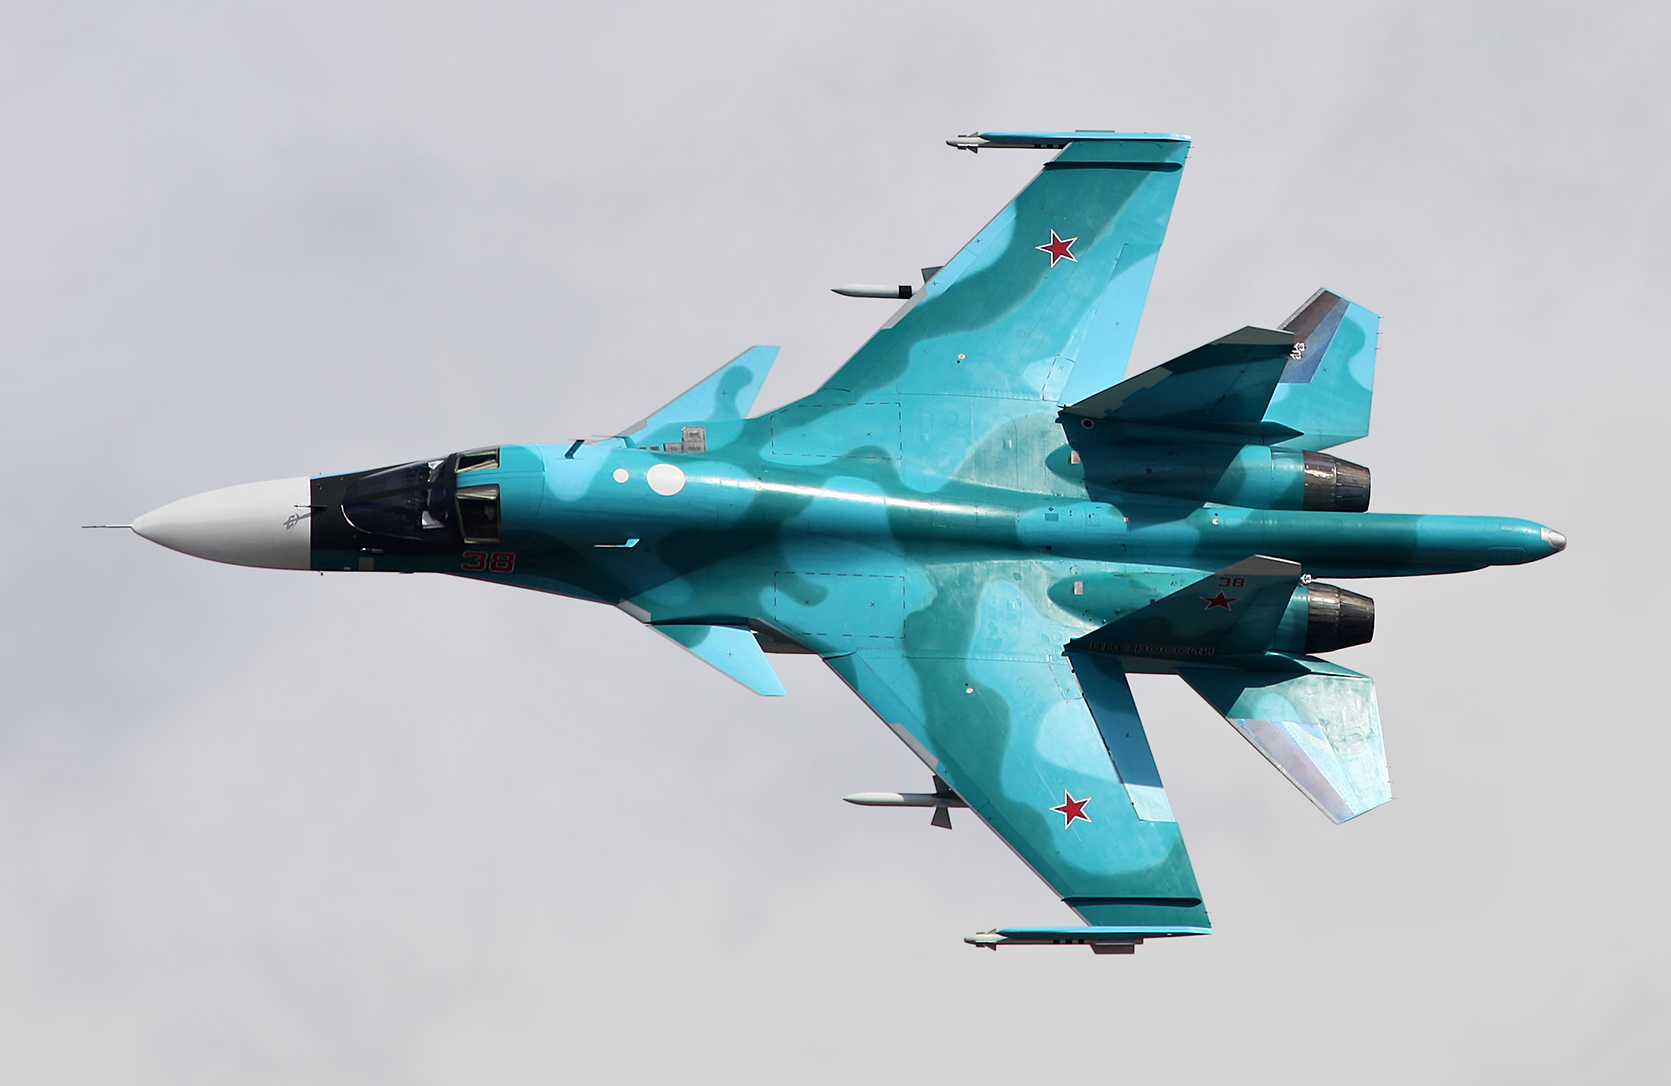 Video: AFU destroys Russian Su-34 supersonic fighter jet worth up to $50m